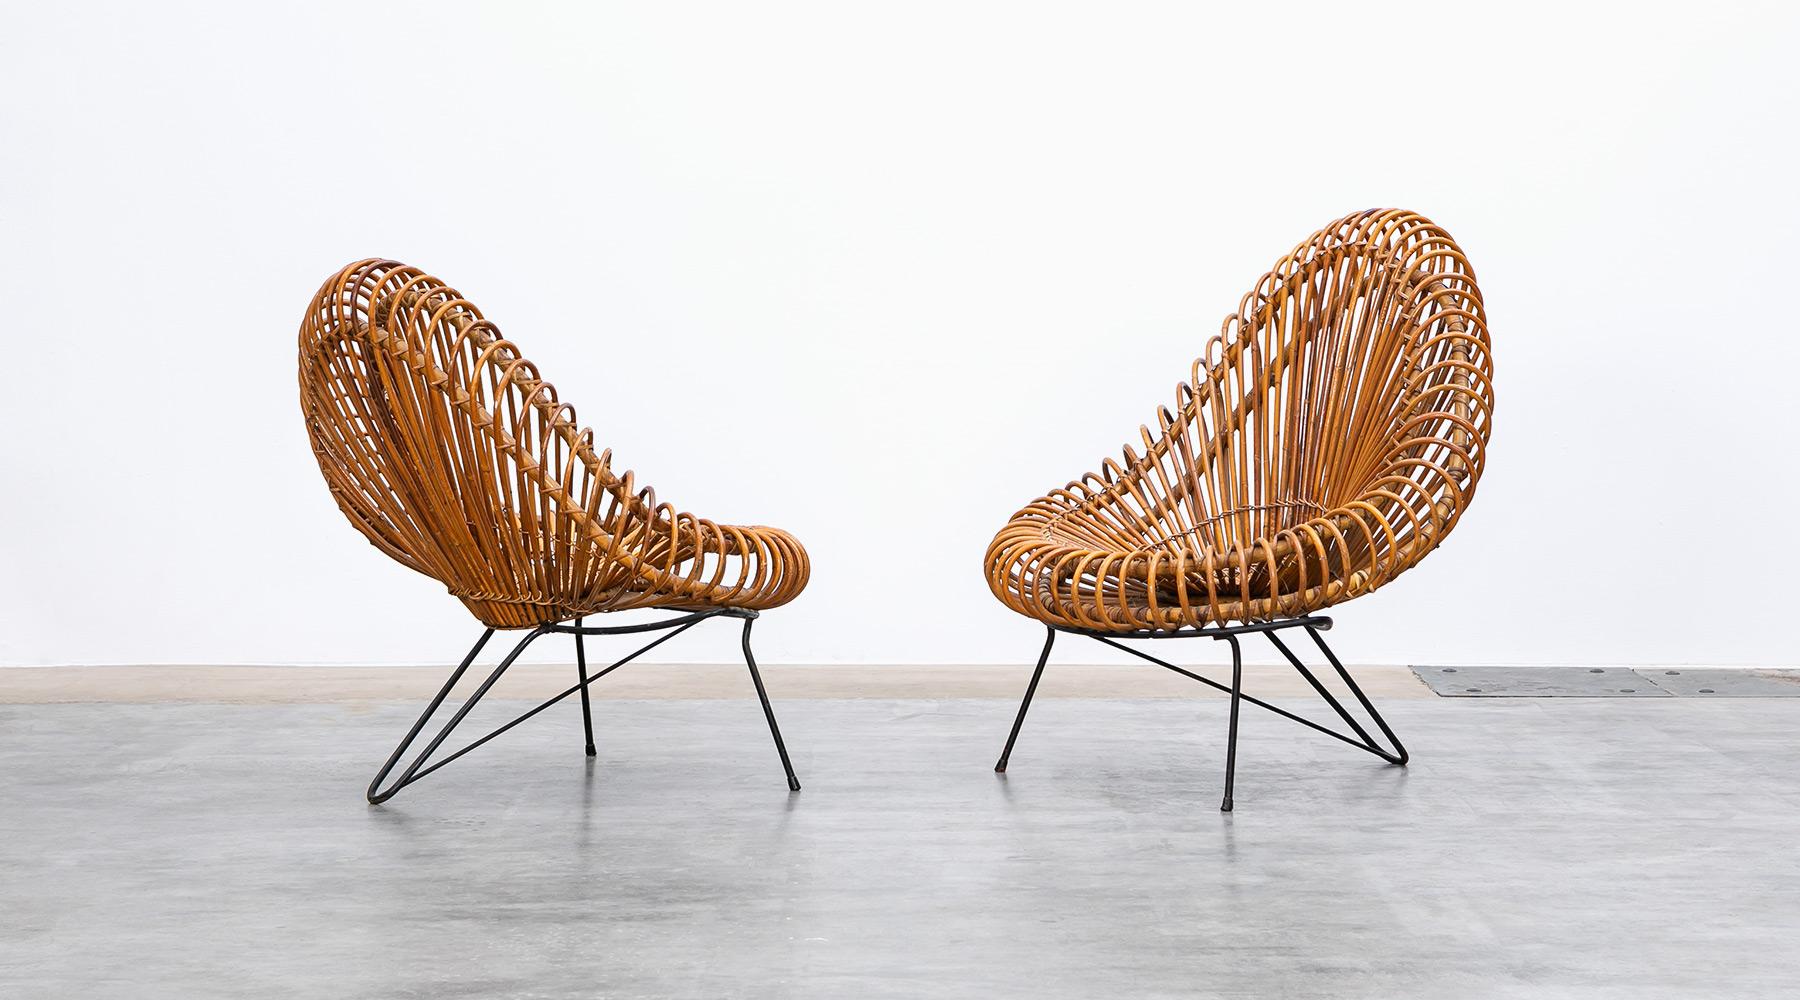 Basket lounge chairs by Janine Abraham and Dirk Jan Rol, France, 1950.

This basketware lounge chairs from 1955 is in excellent original condition, designed by Janine Abraham and Dirk Jan Rol. The elegant basket seat shell is held by black